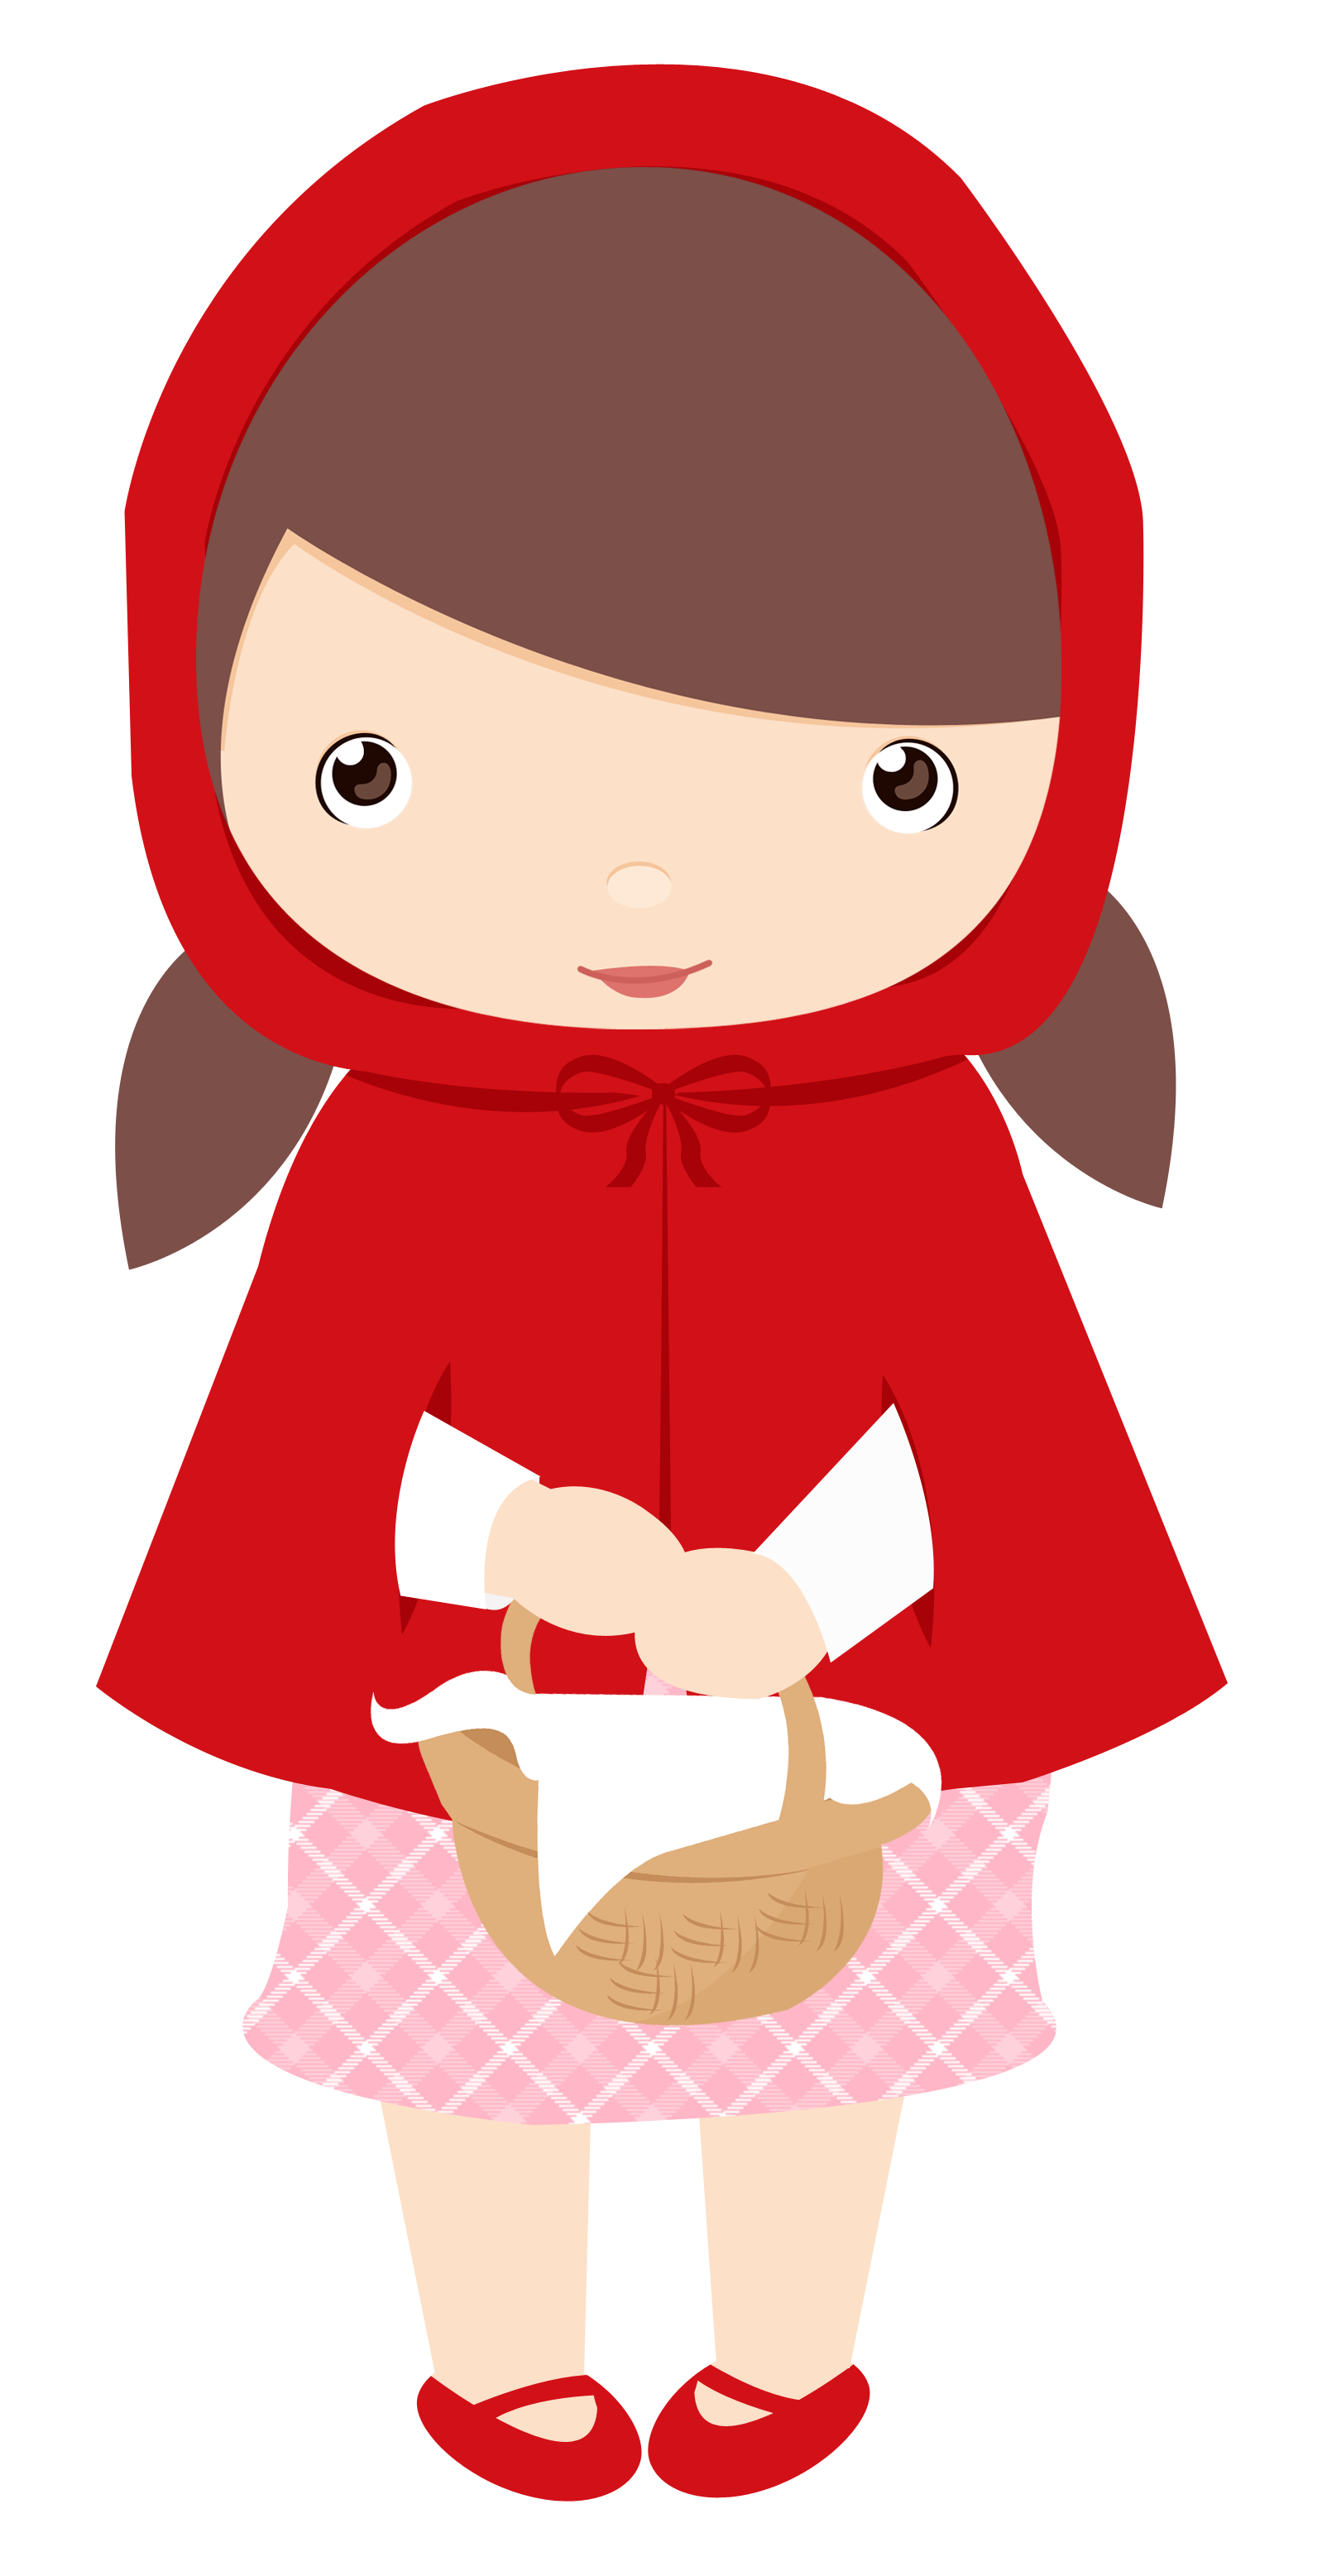 Ie e eumdews png. Mom clipart little red riding hood